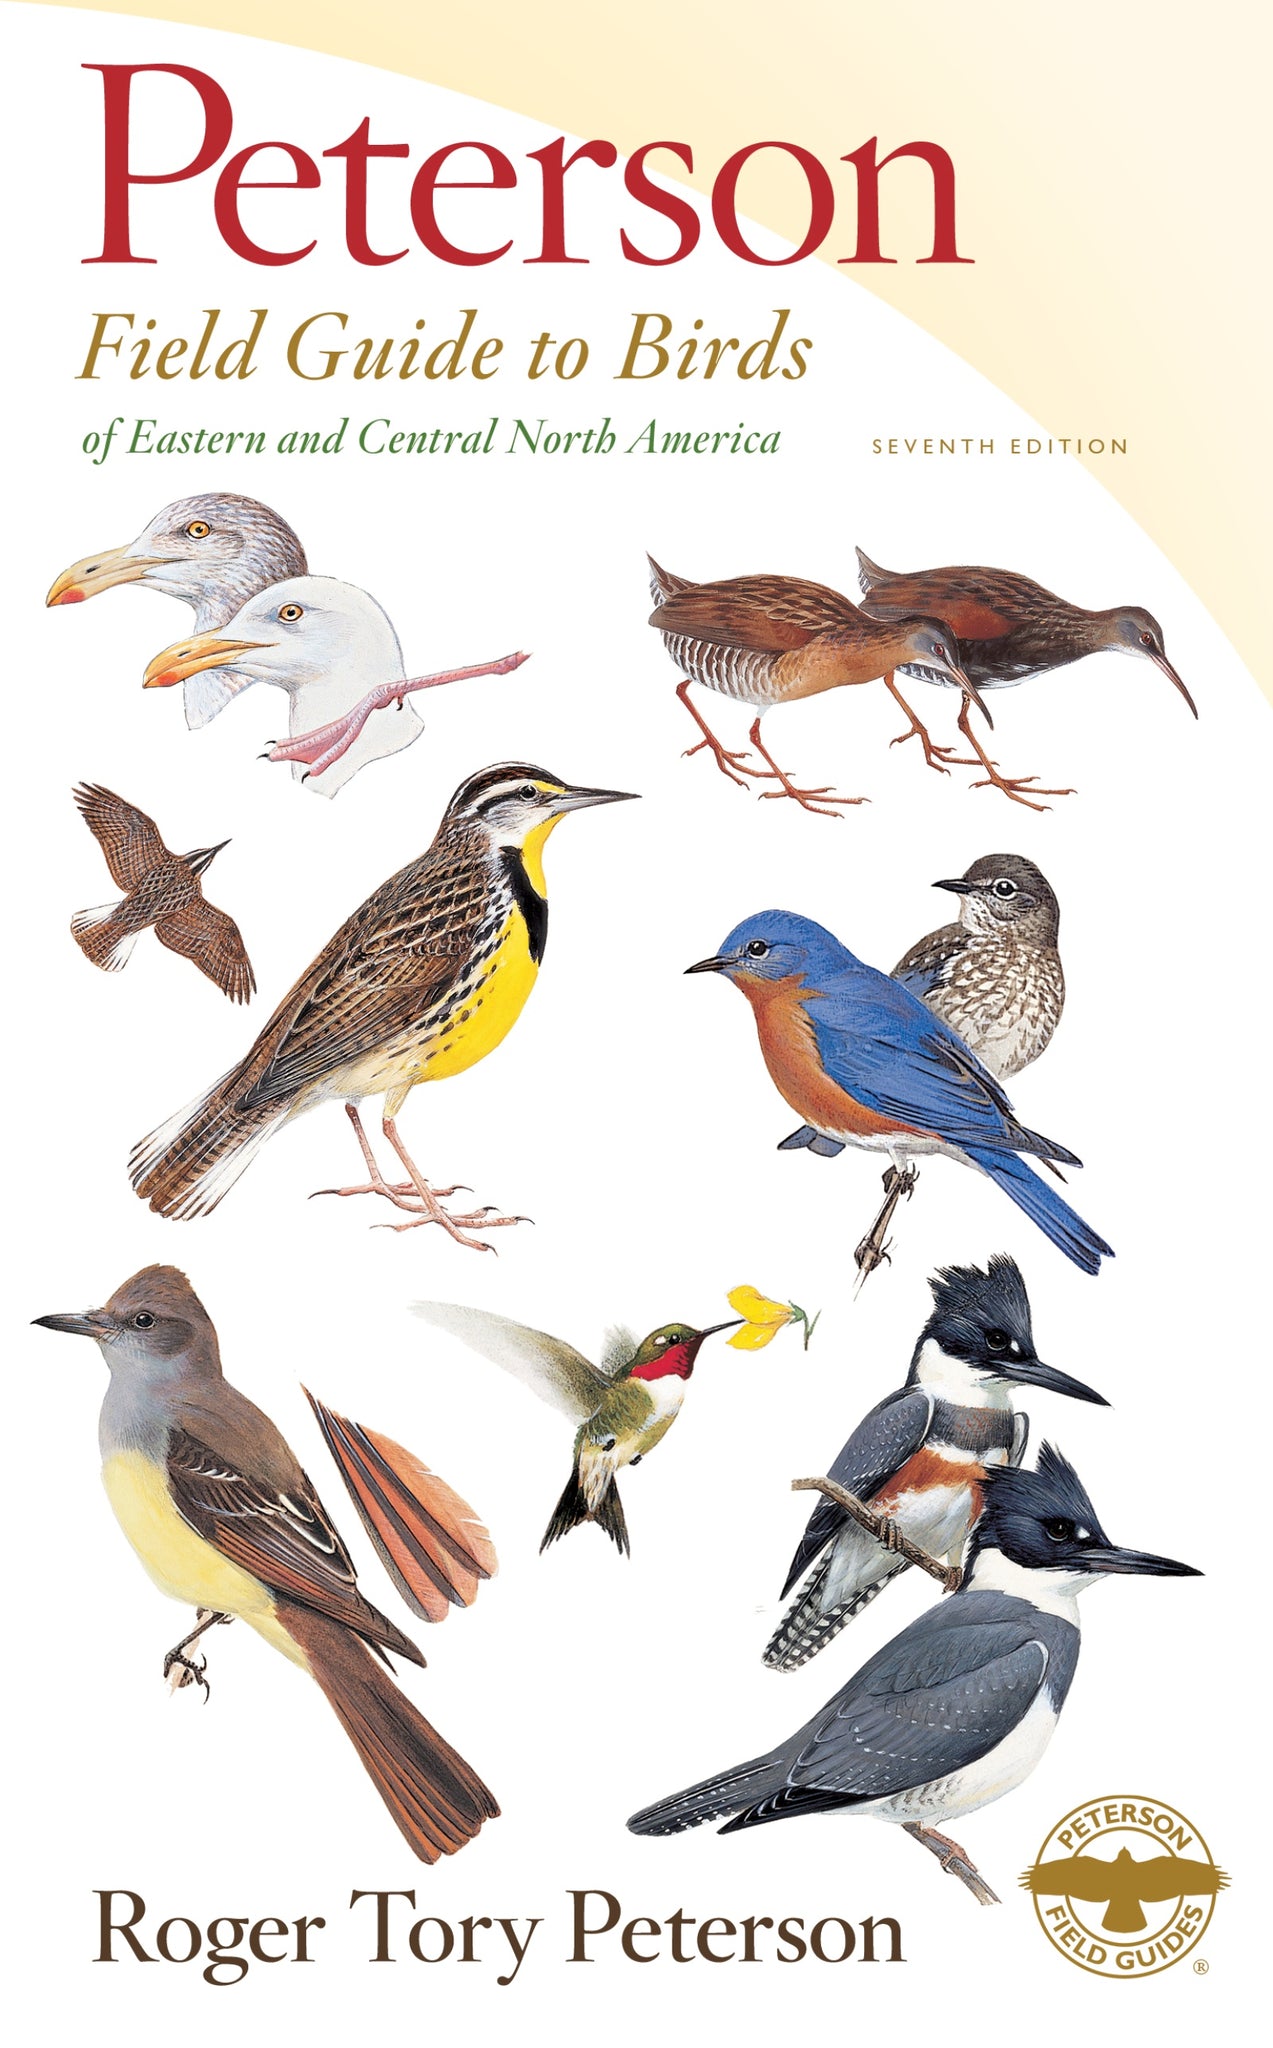 Peterson Field Guide To Birds Of Eastern & Central North America, Seventh Ed.